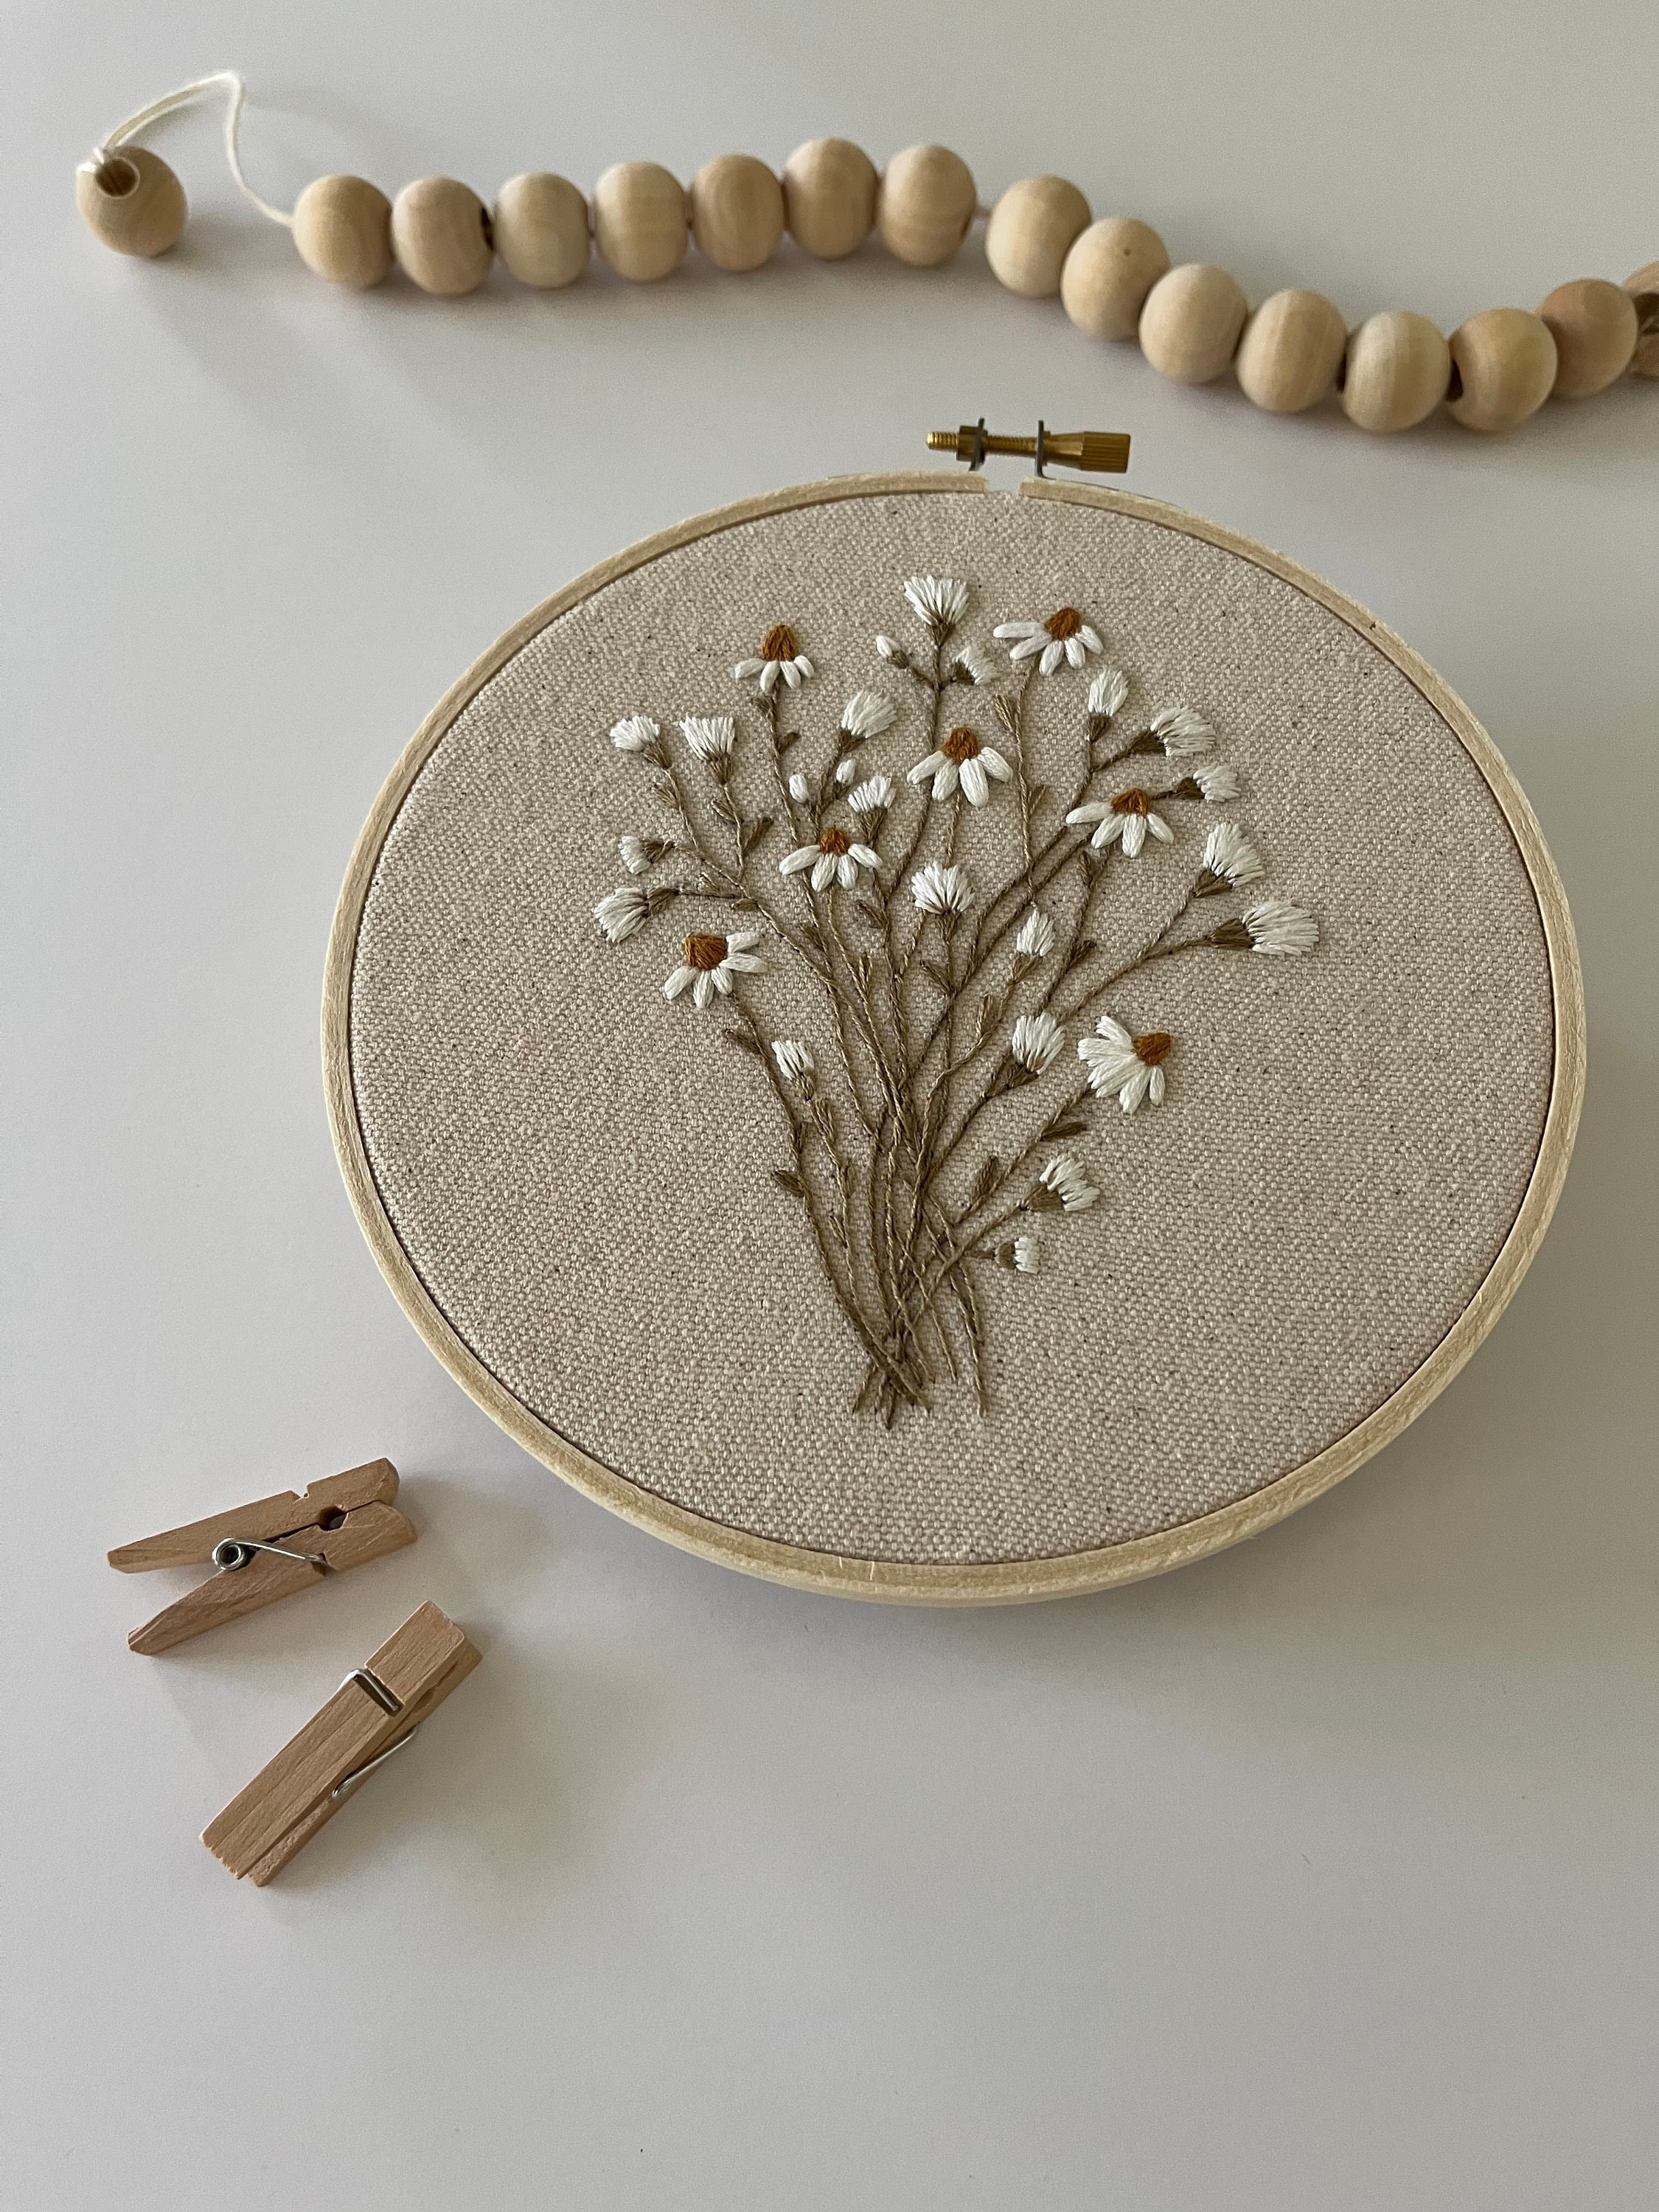 Sunset Embroidery Kit, Craft Kit for Beginners, Paisley Hoop Art, Modern  Needlework Set, Nature Lovers Gift, DIY Embroidery Pattern 